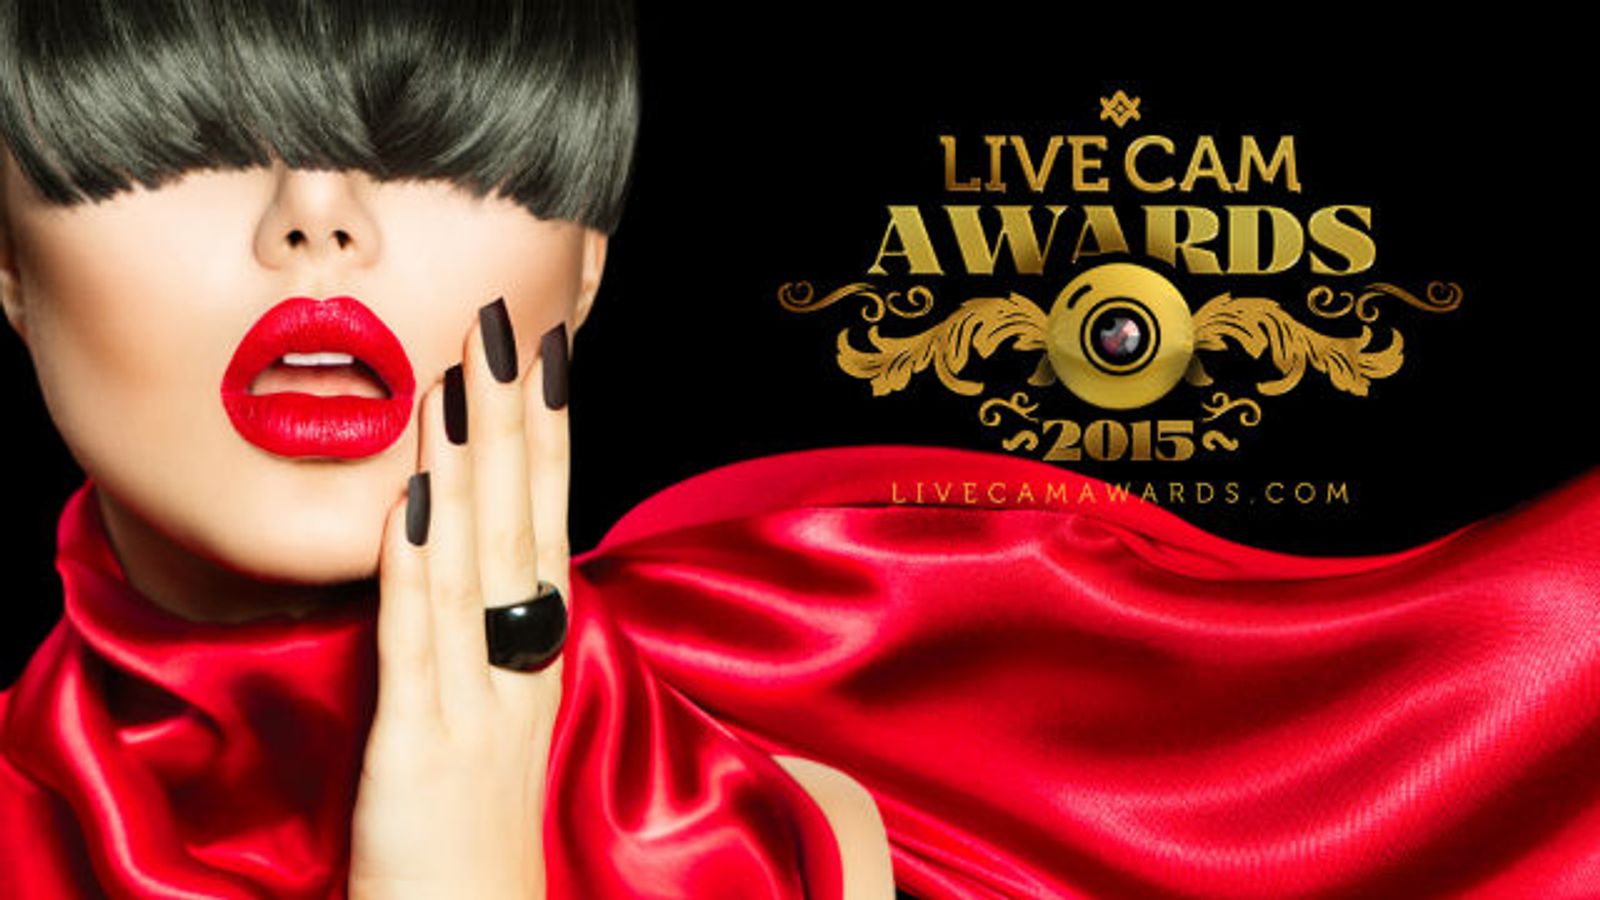 Live Cam Awards Announces Nominees for Inaugural Event